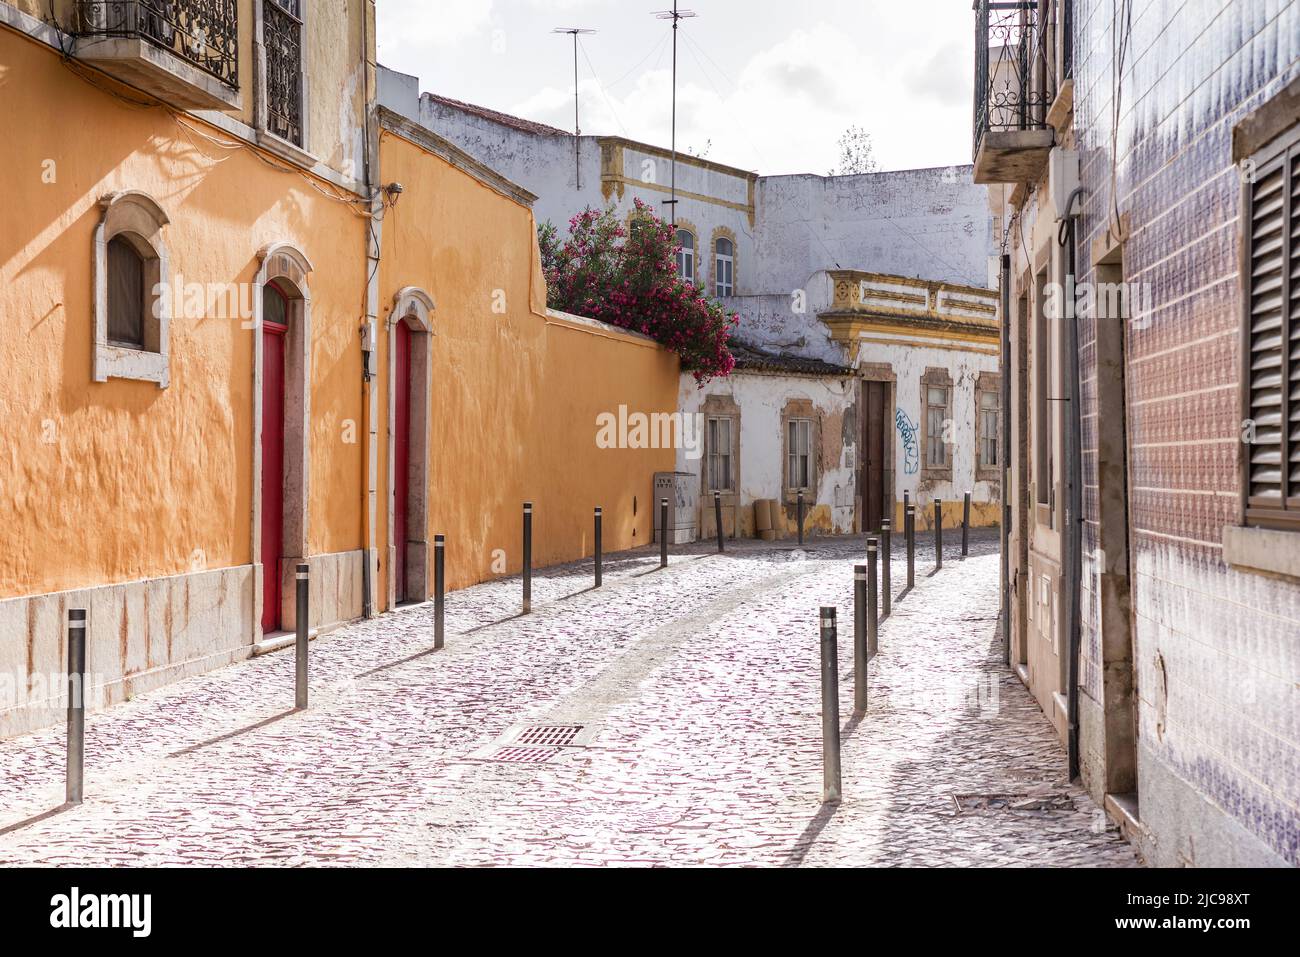 Picturesque side street basking in the late afternoon sun - Tavira, Portugal Stock Photo